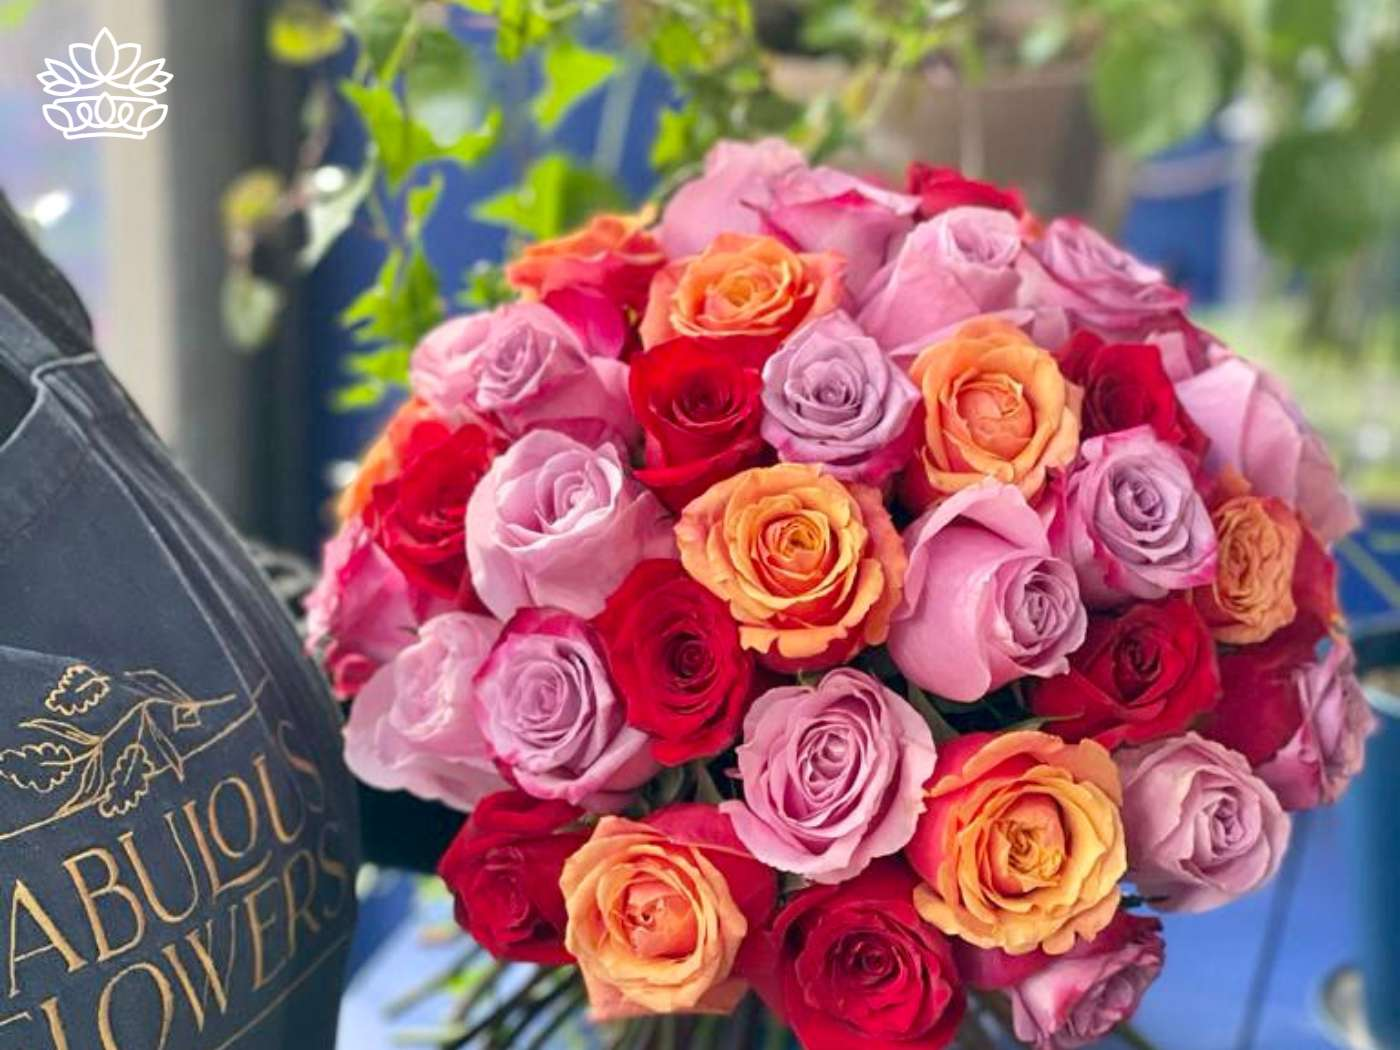 An excited florist holding a vibrant bouquet of roses you deserve in shades of pink, orange, and red, epitomizing the exquisite selection at Fabulous Flowers and Gifts.